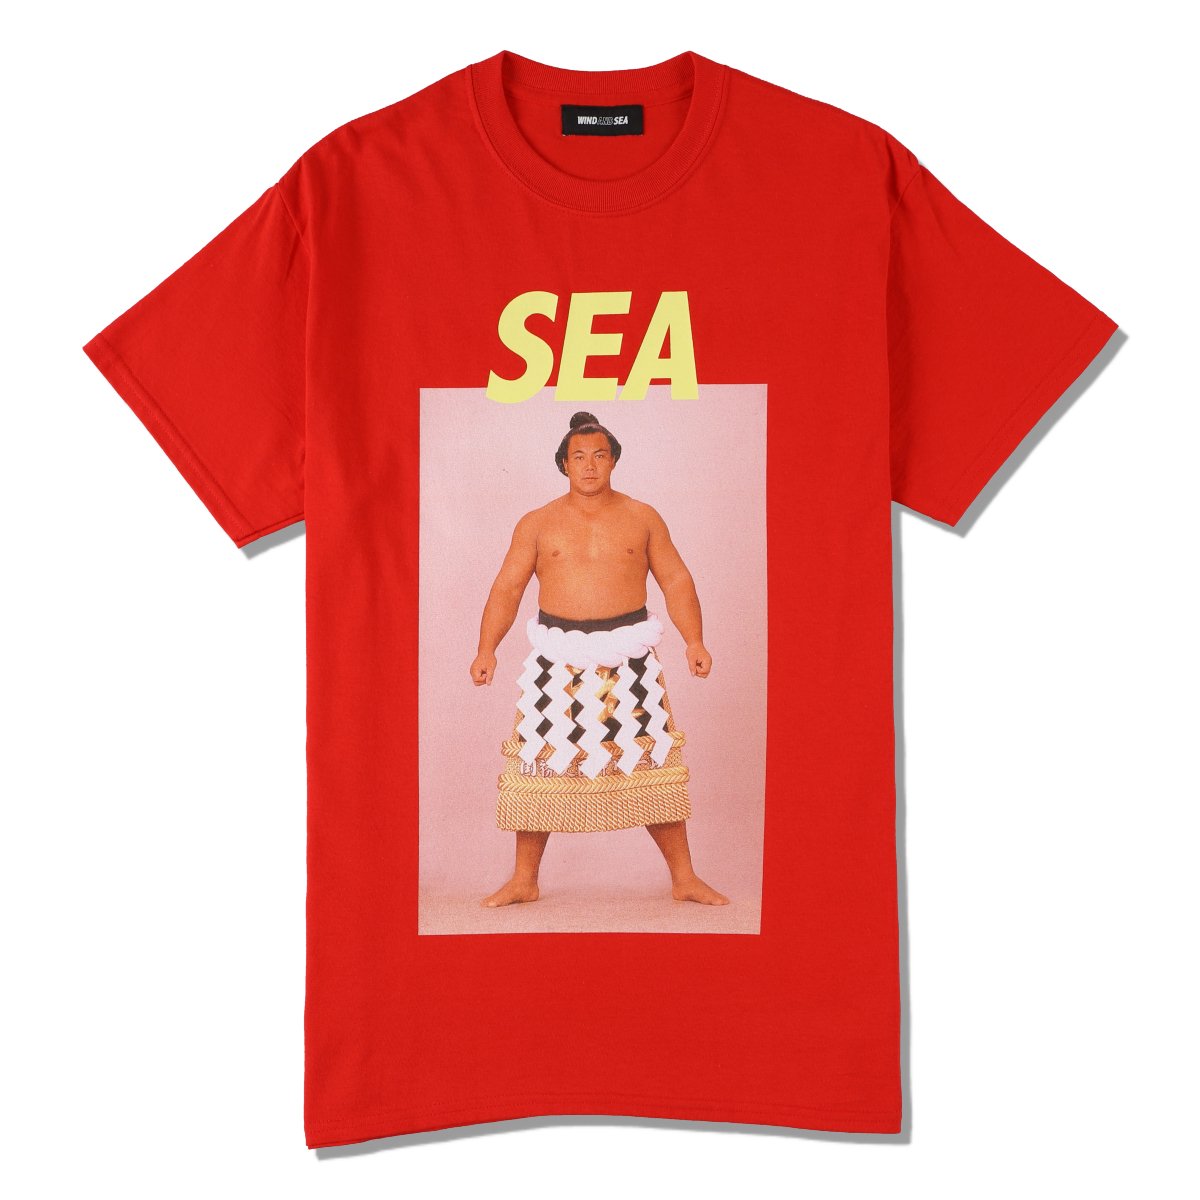 Wind and sea t-shirt